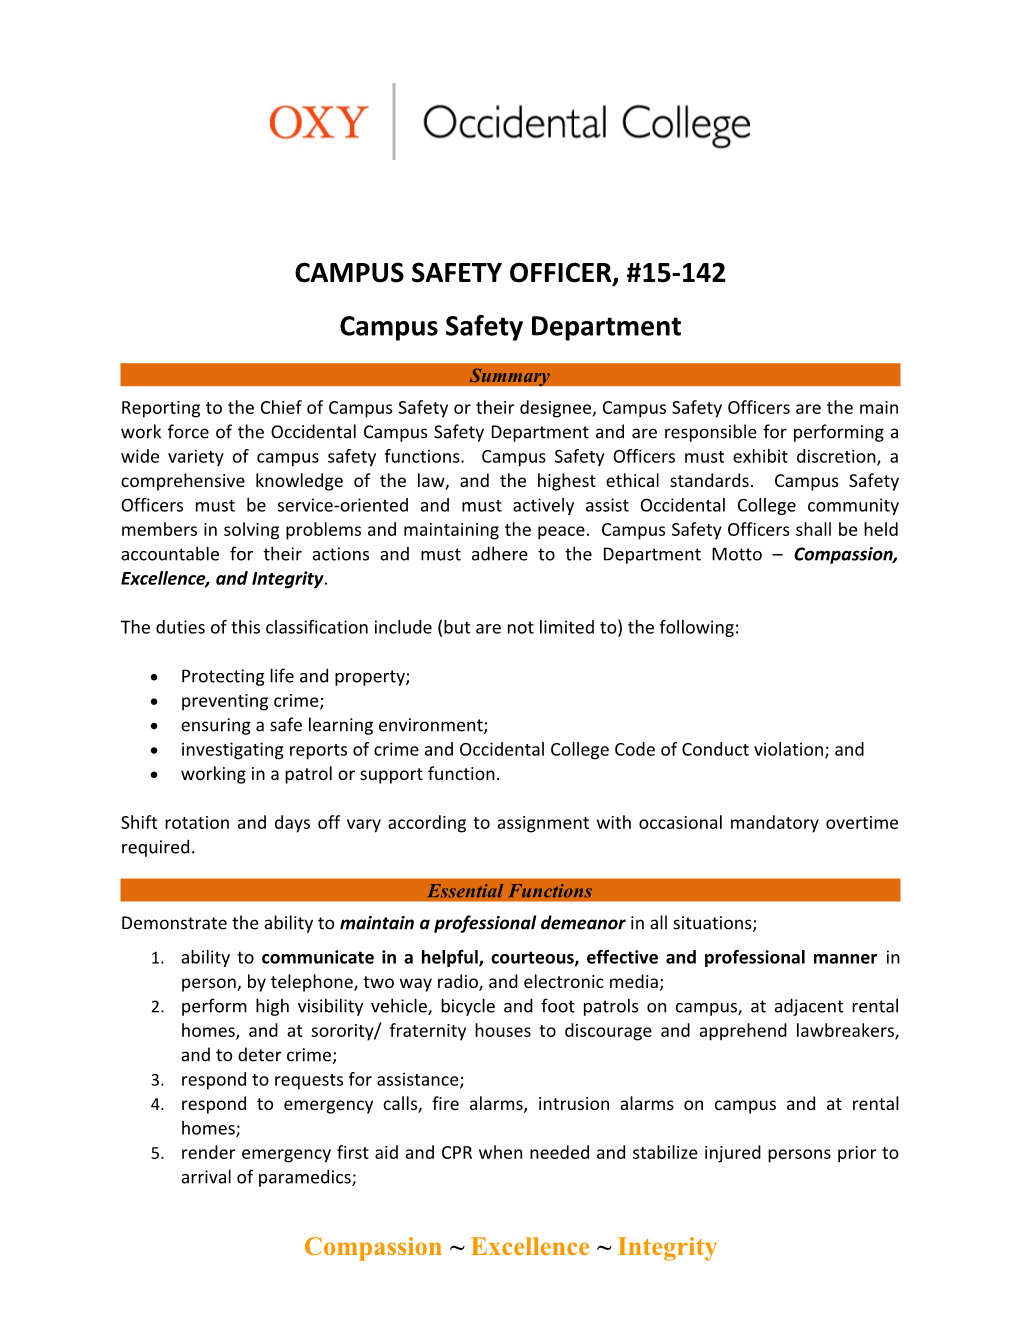 Campus Safety Officer, #15-142